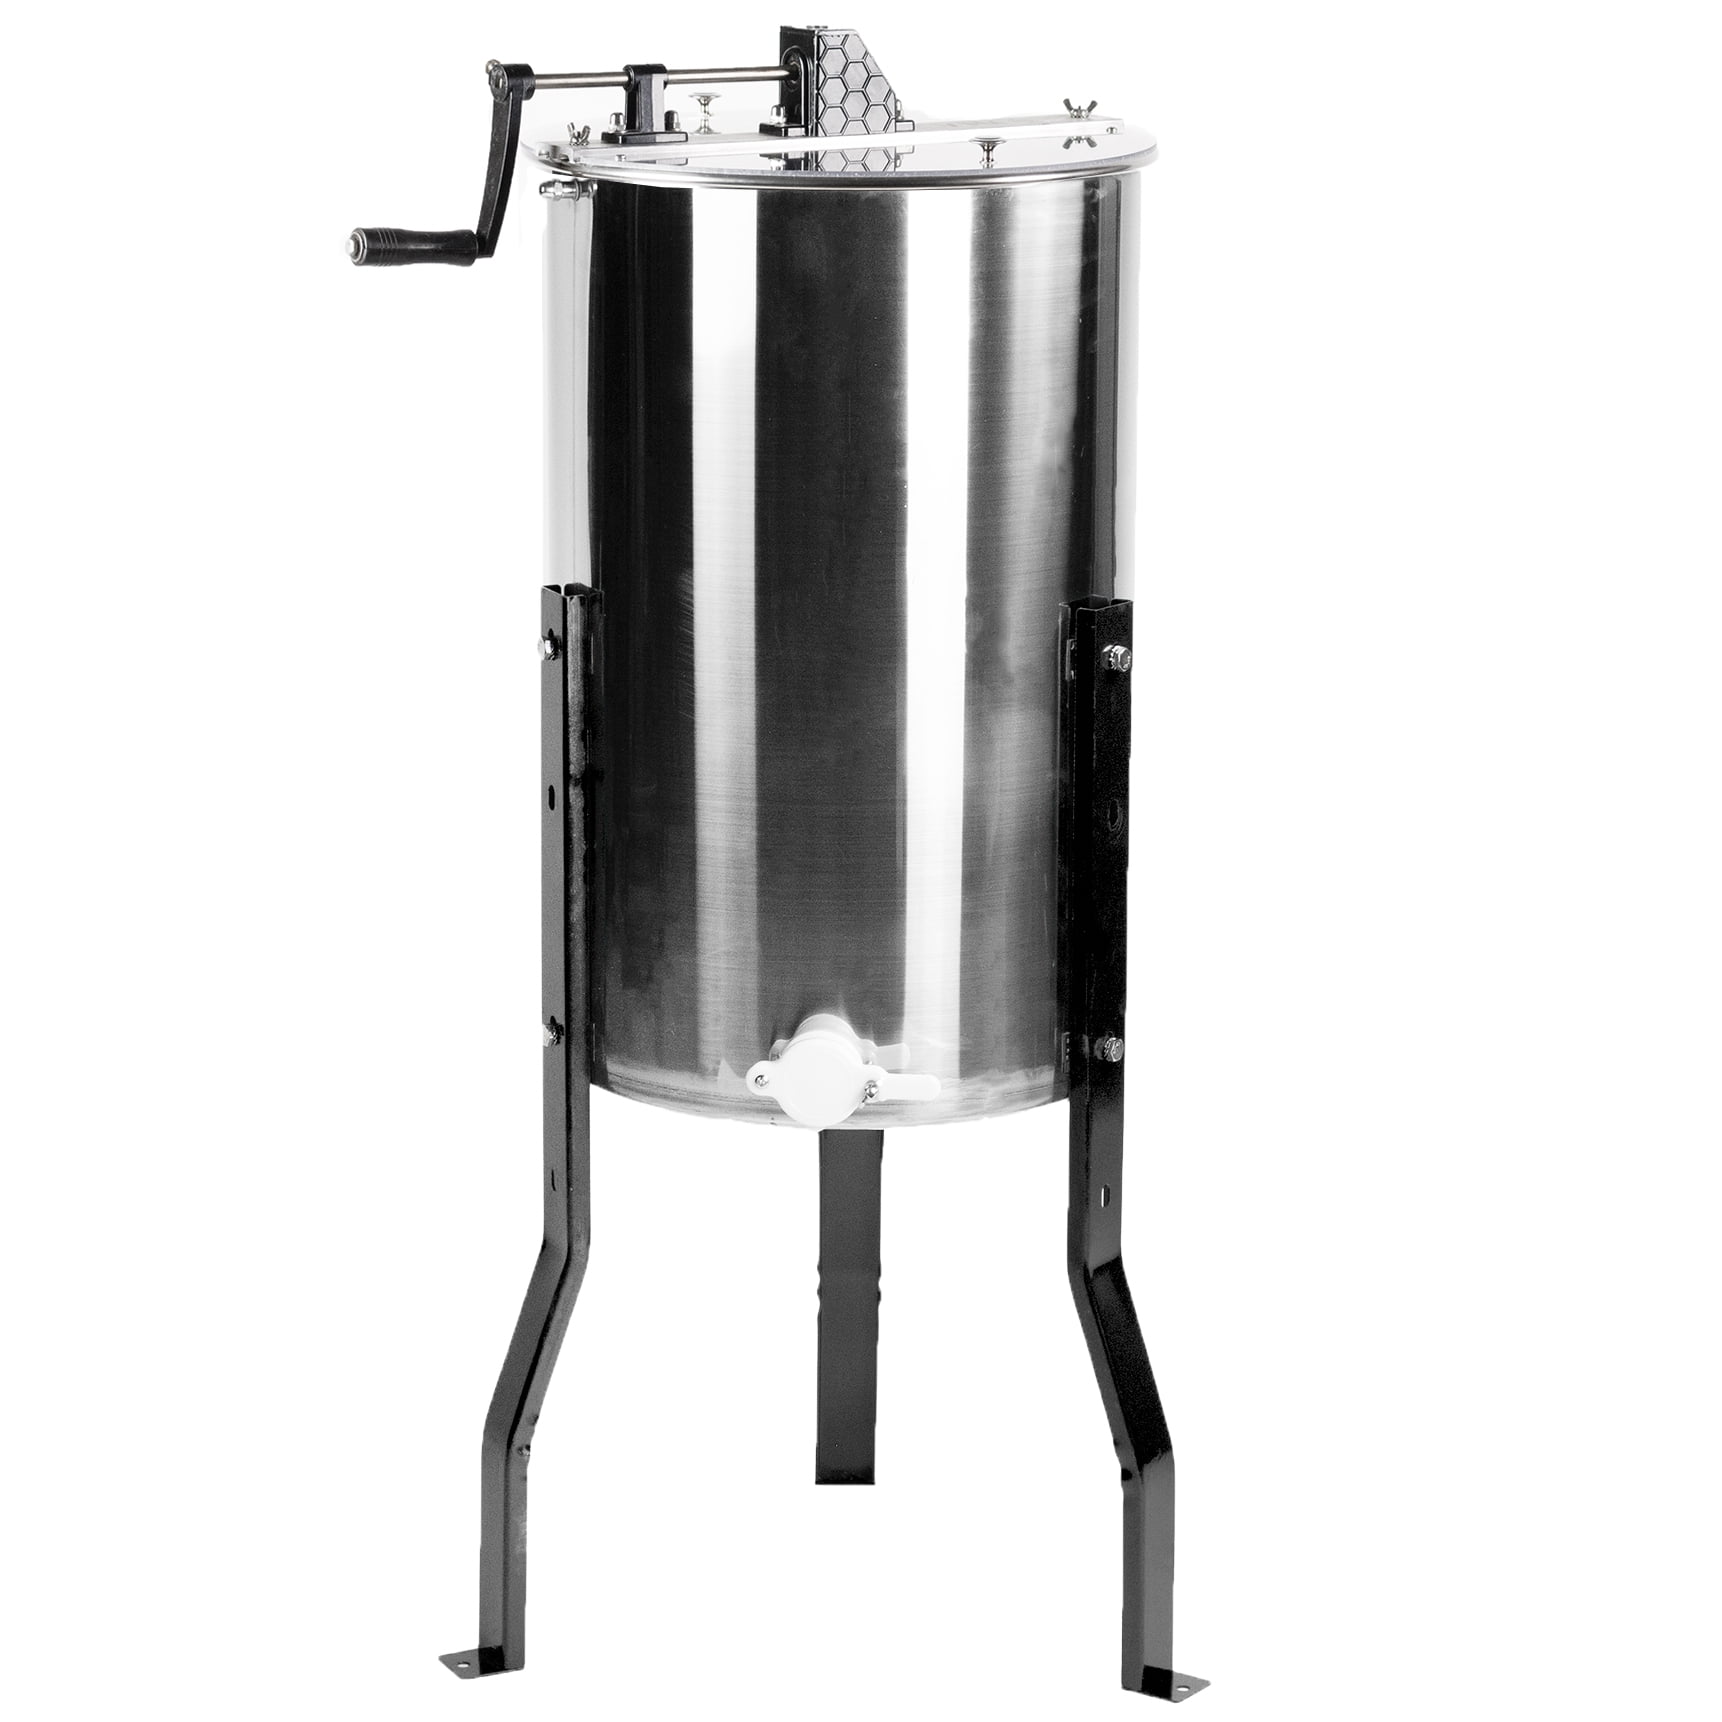 Details about   Manual Honey Bee Honey Extractor Beekeeping Stainless Steel Drum 30" 2 Frame 